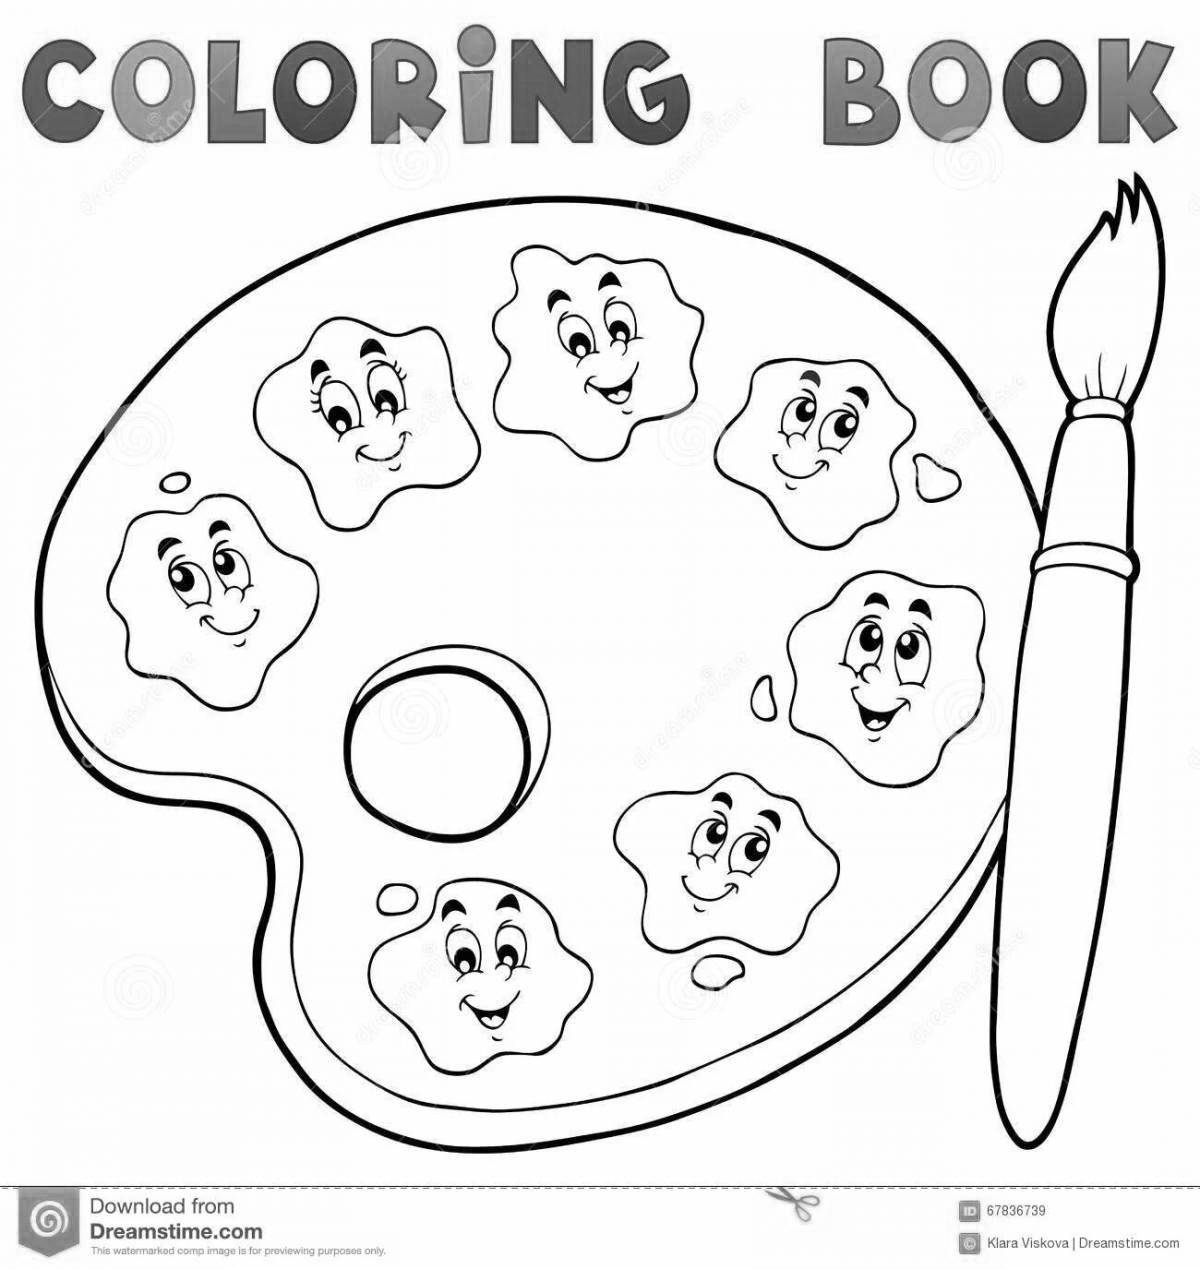 Colorful educational coloring book for kids